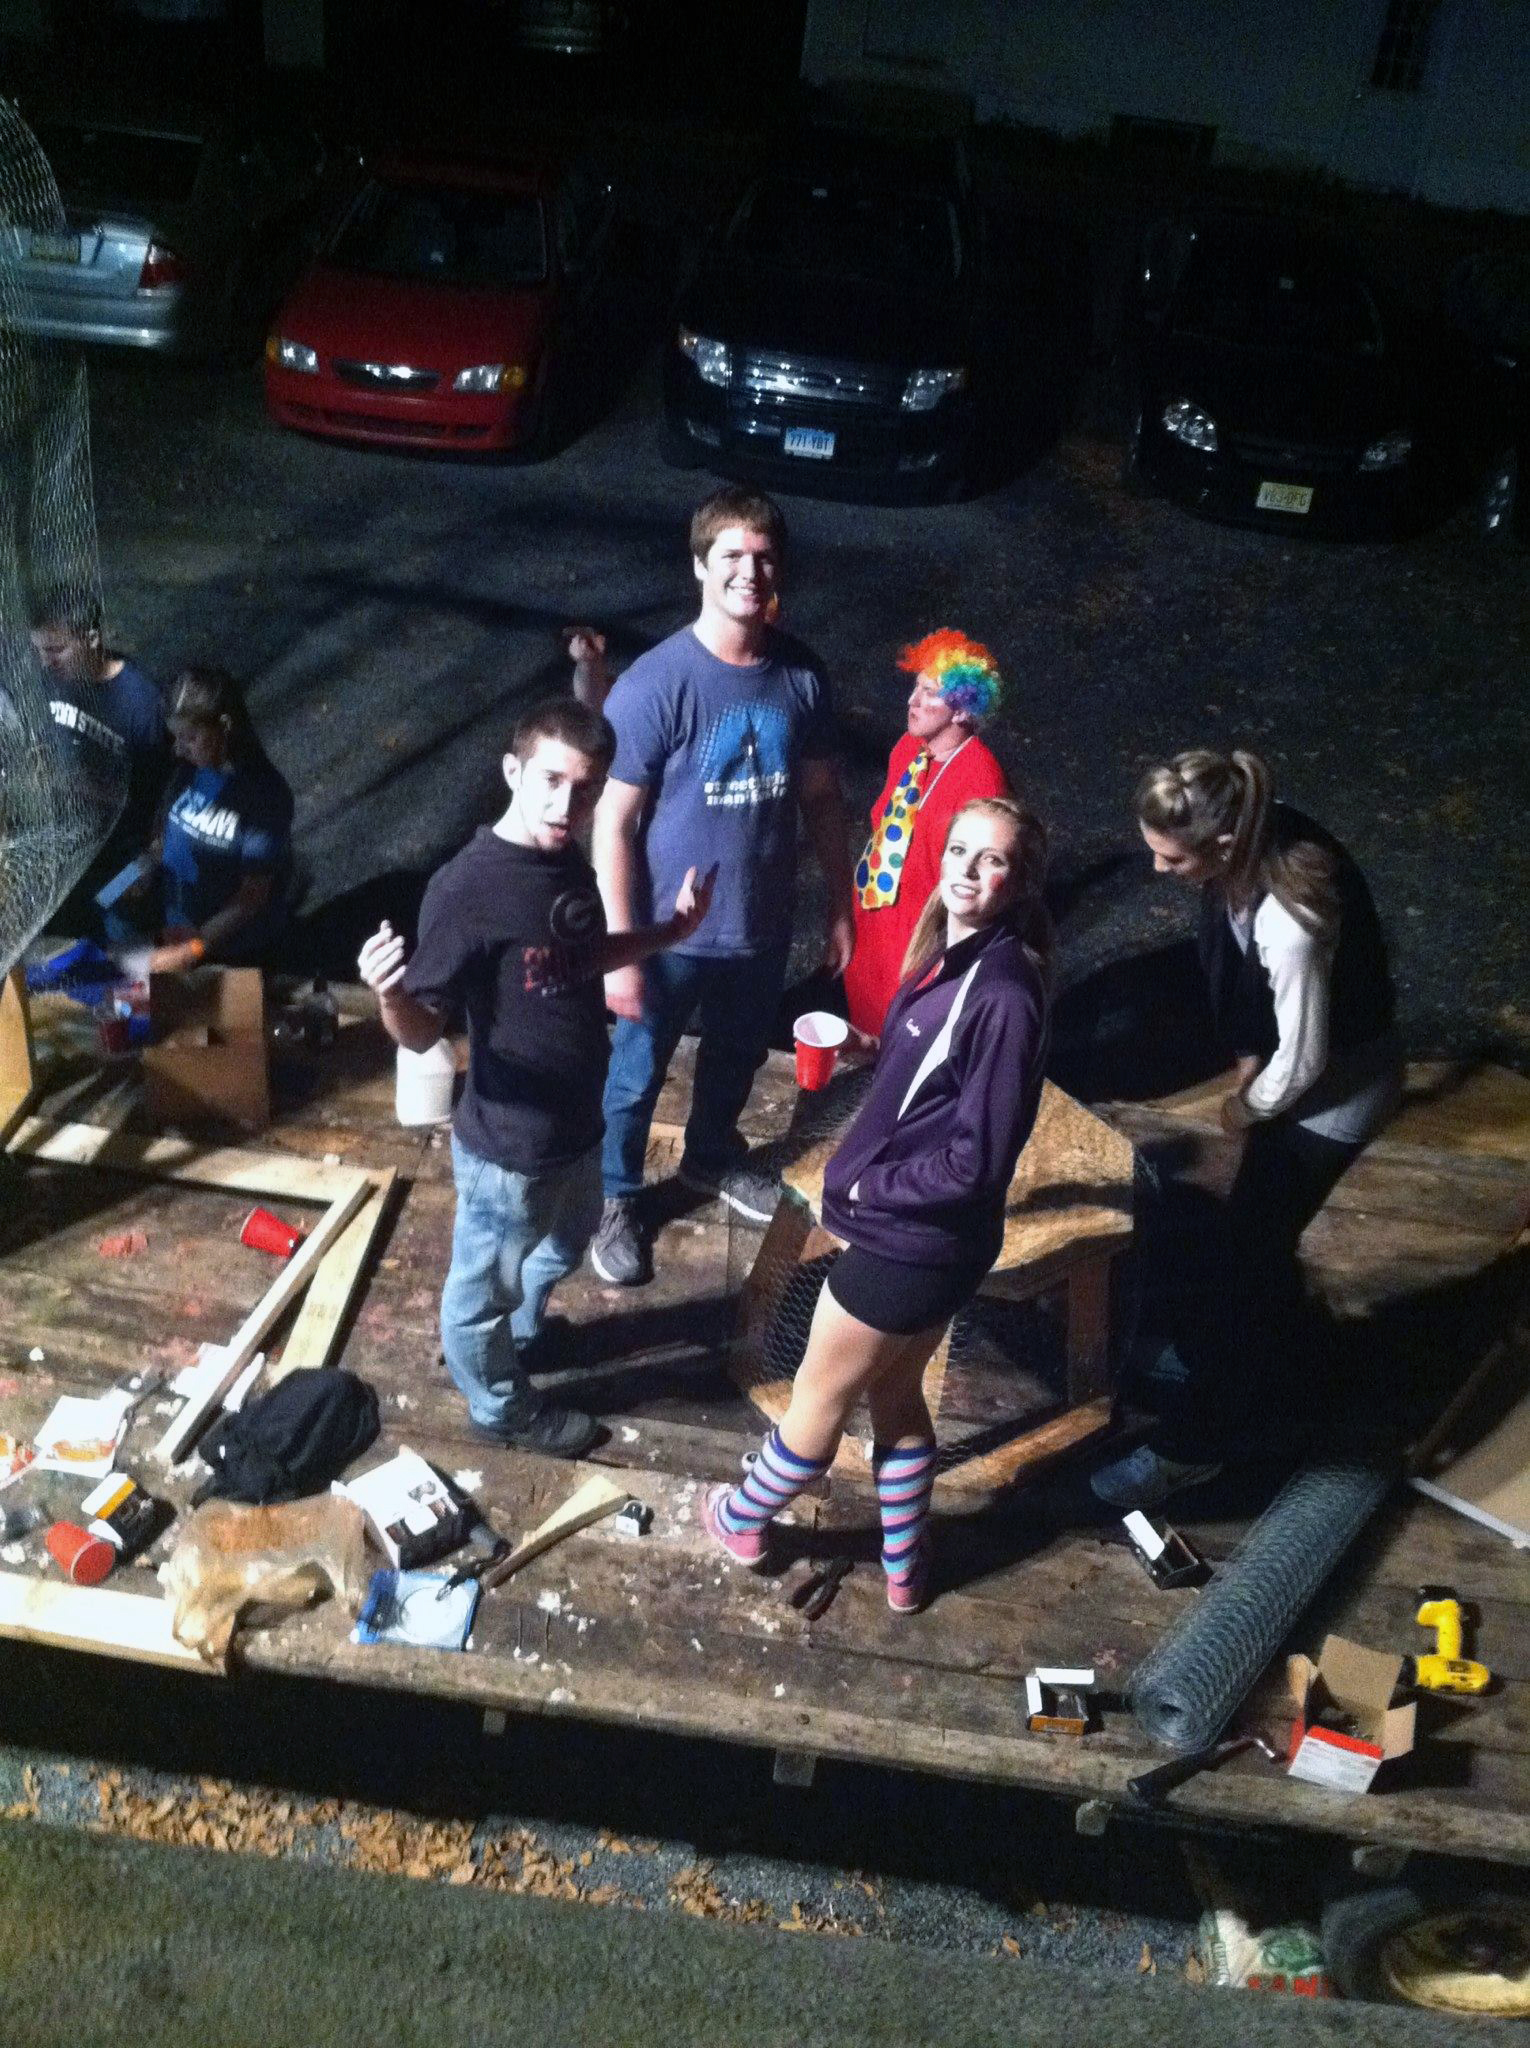  Homecoming 2013 preparations begin with float building - Sam Kulp, Ian Maxwell and Jerry Crompton - Oct. 8, 2013 